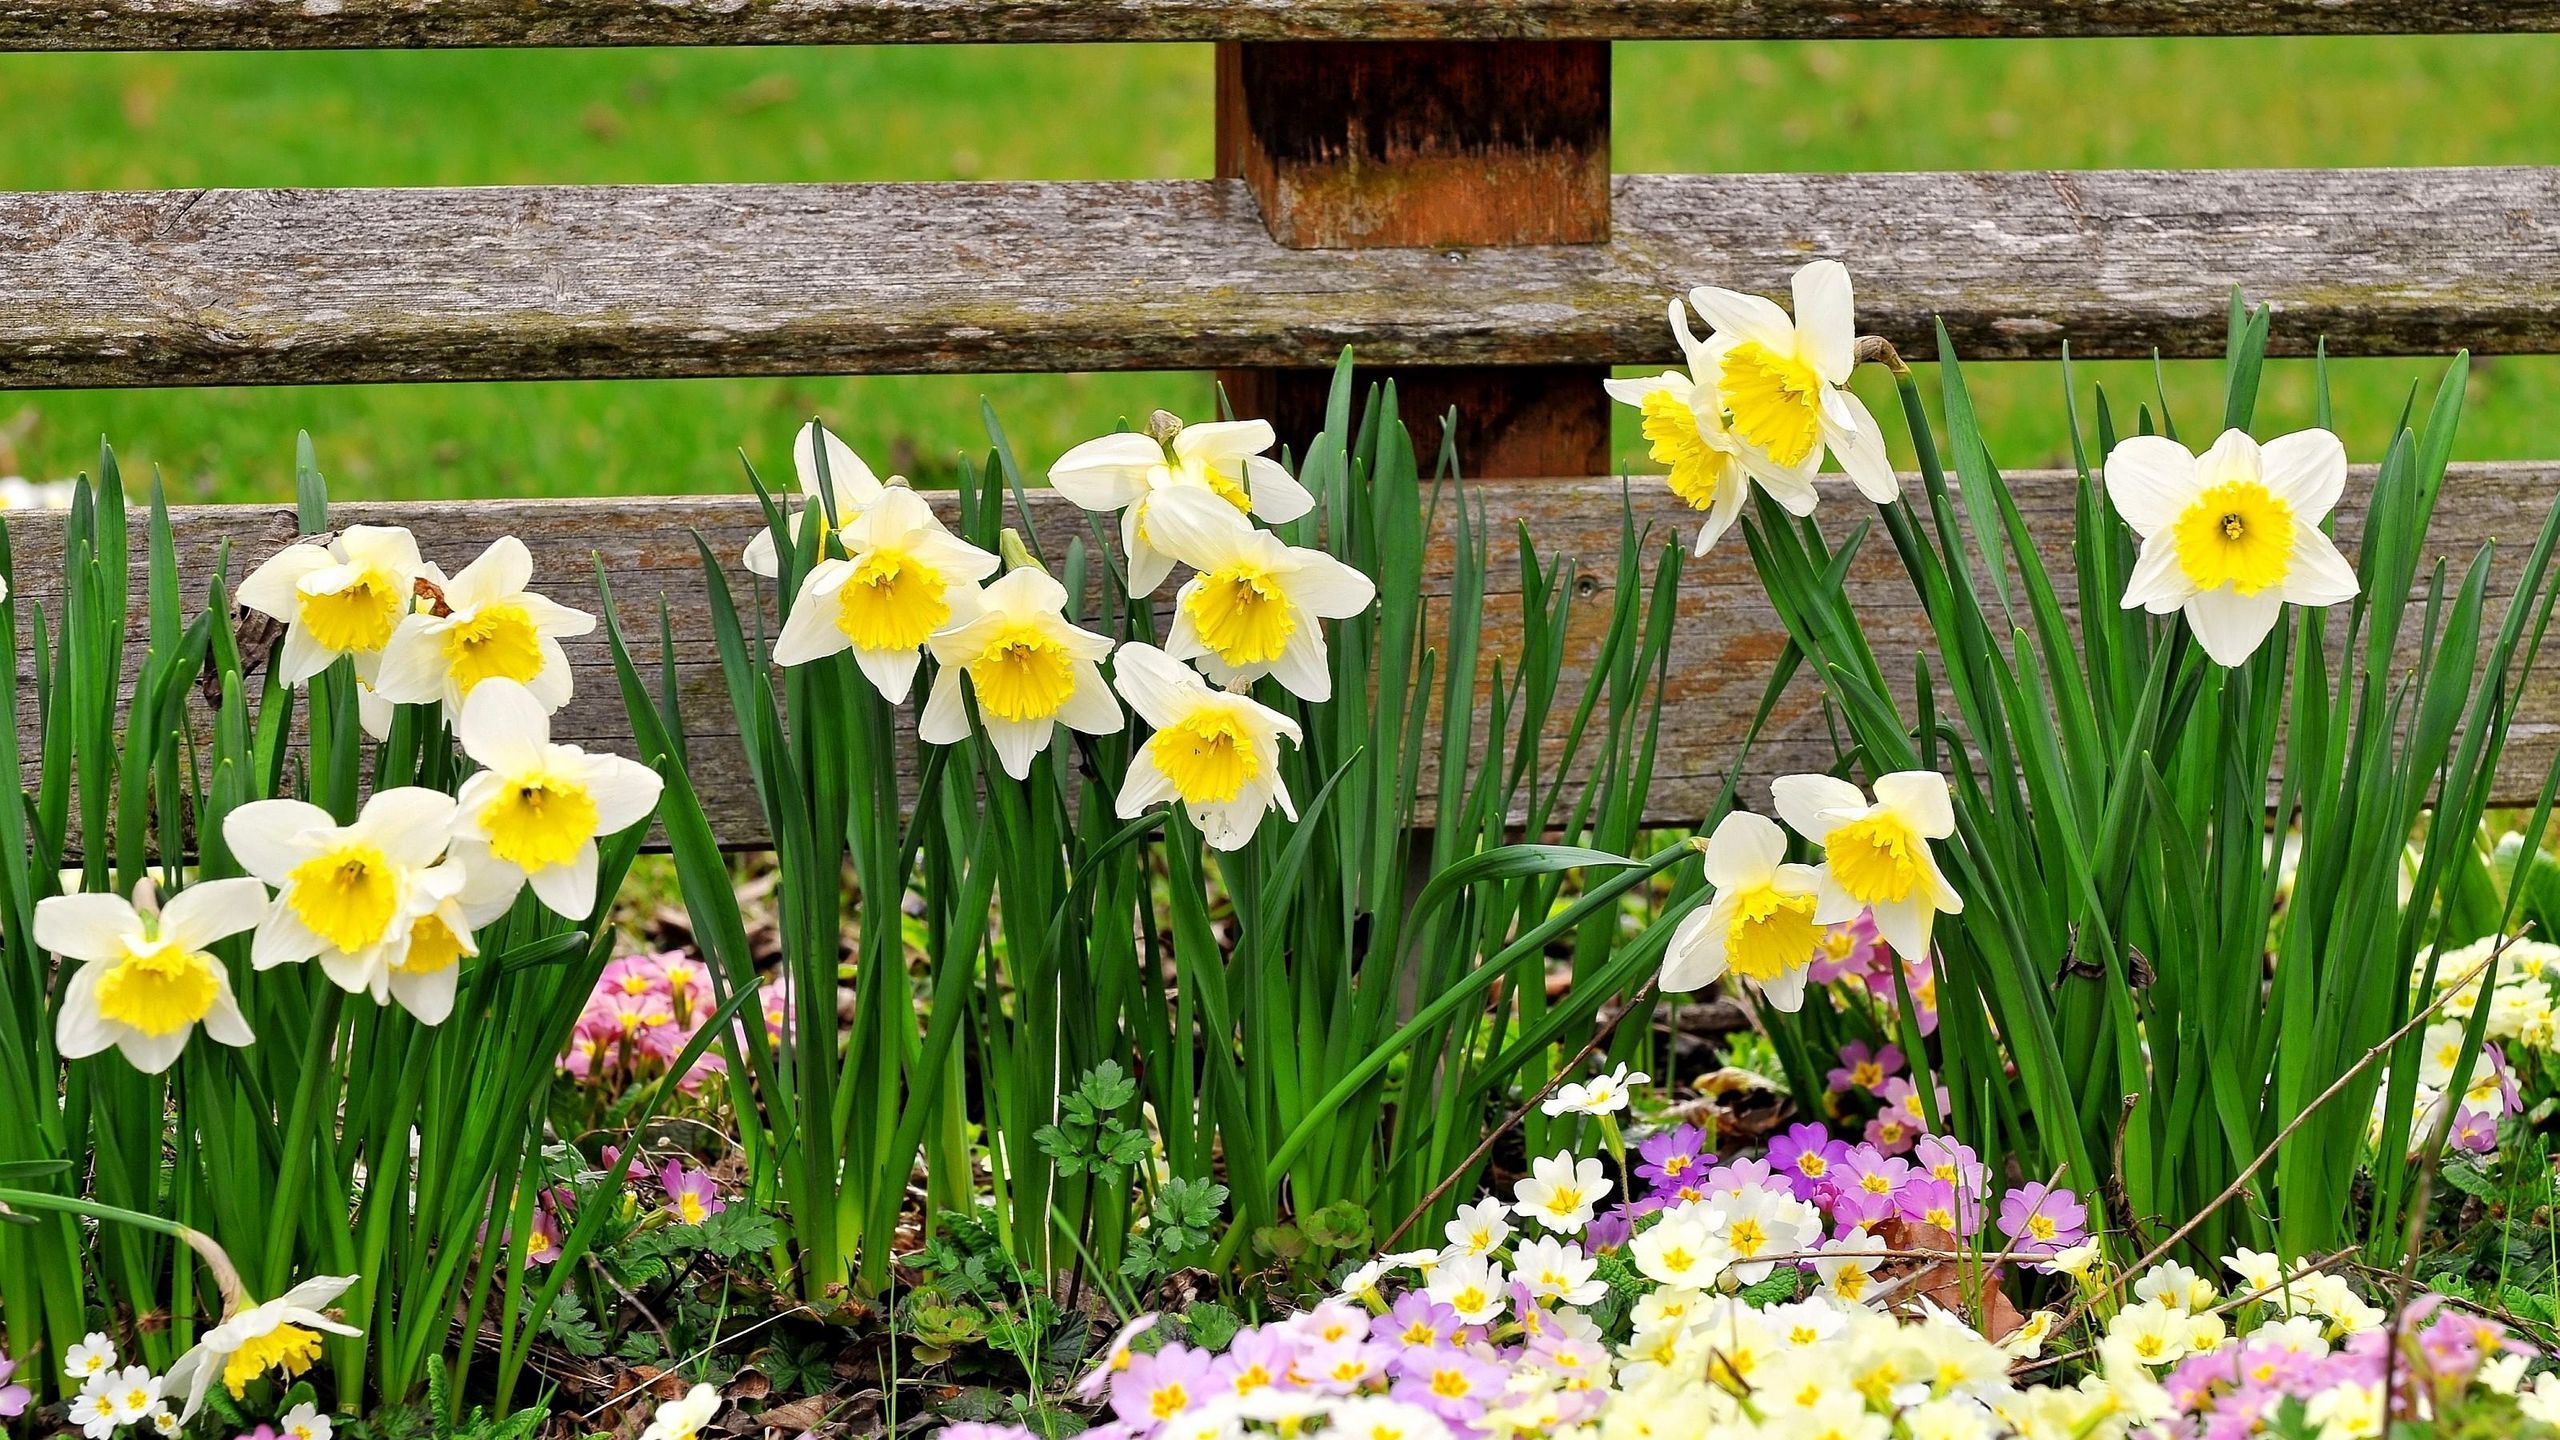 Download wallpaper 2560x1440 daffodils, primroses, flowers, fence, spring widescreen 16:9 HD background